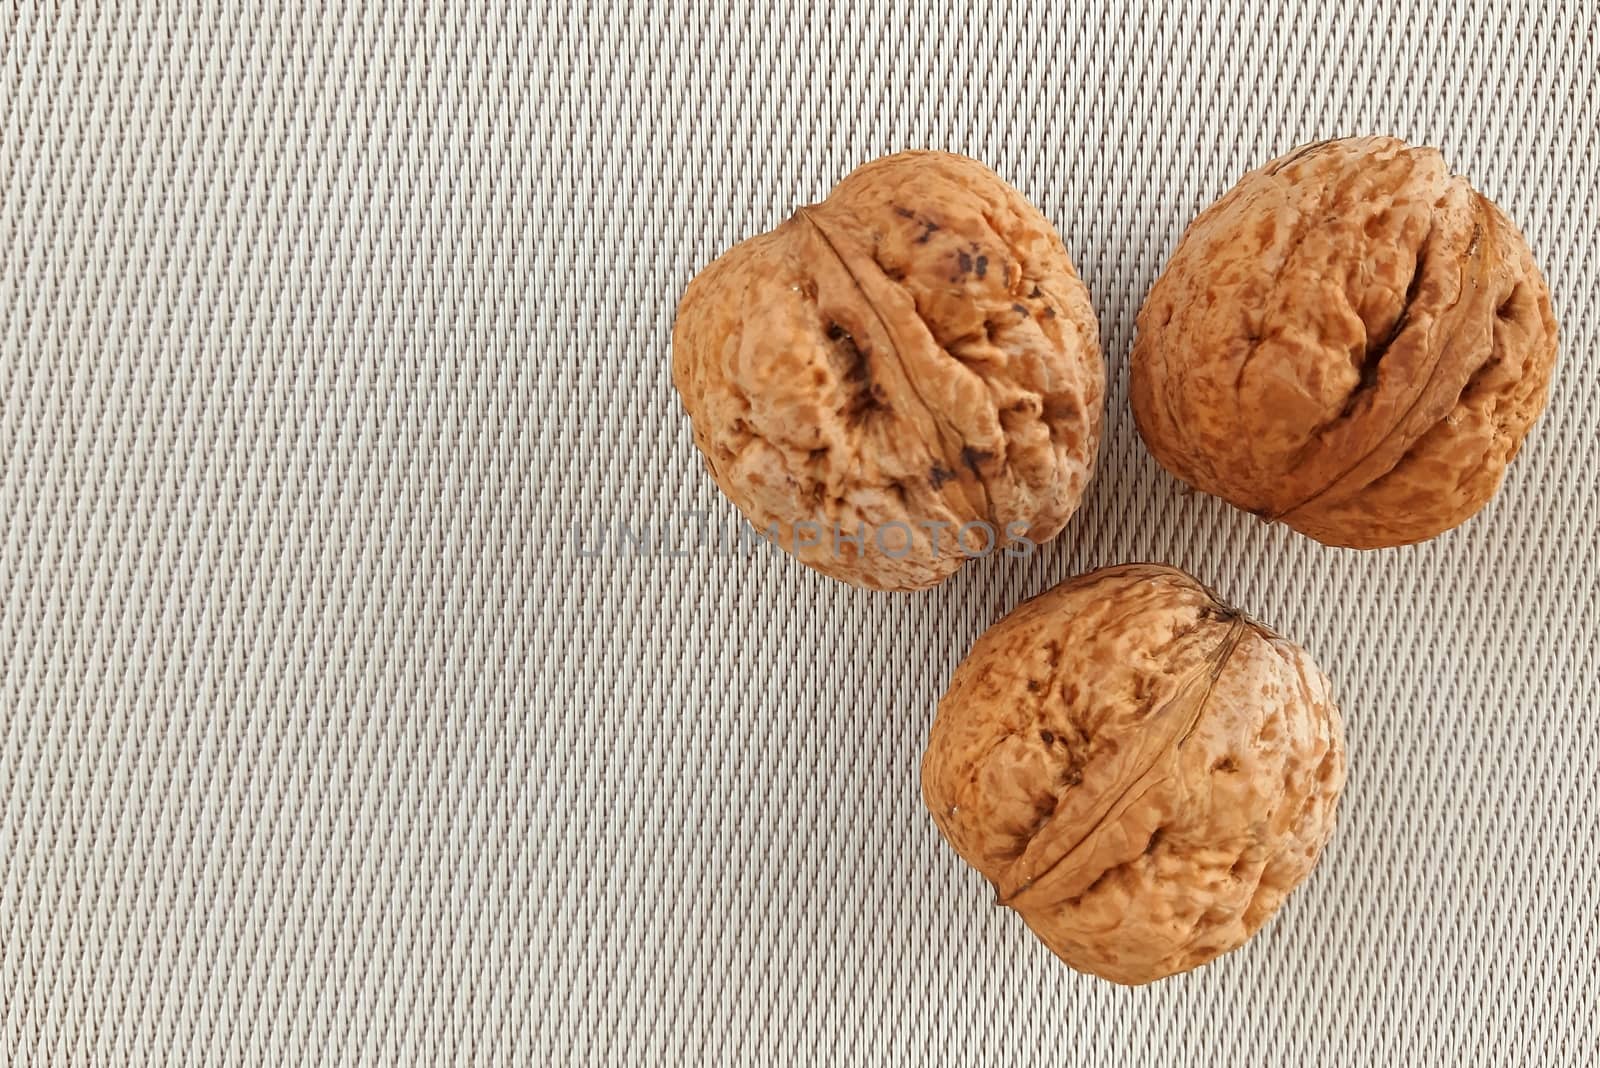 Big nuts on canvas background